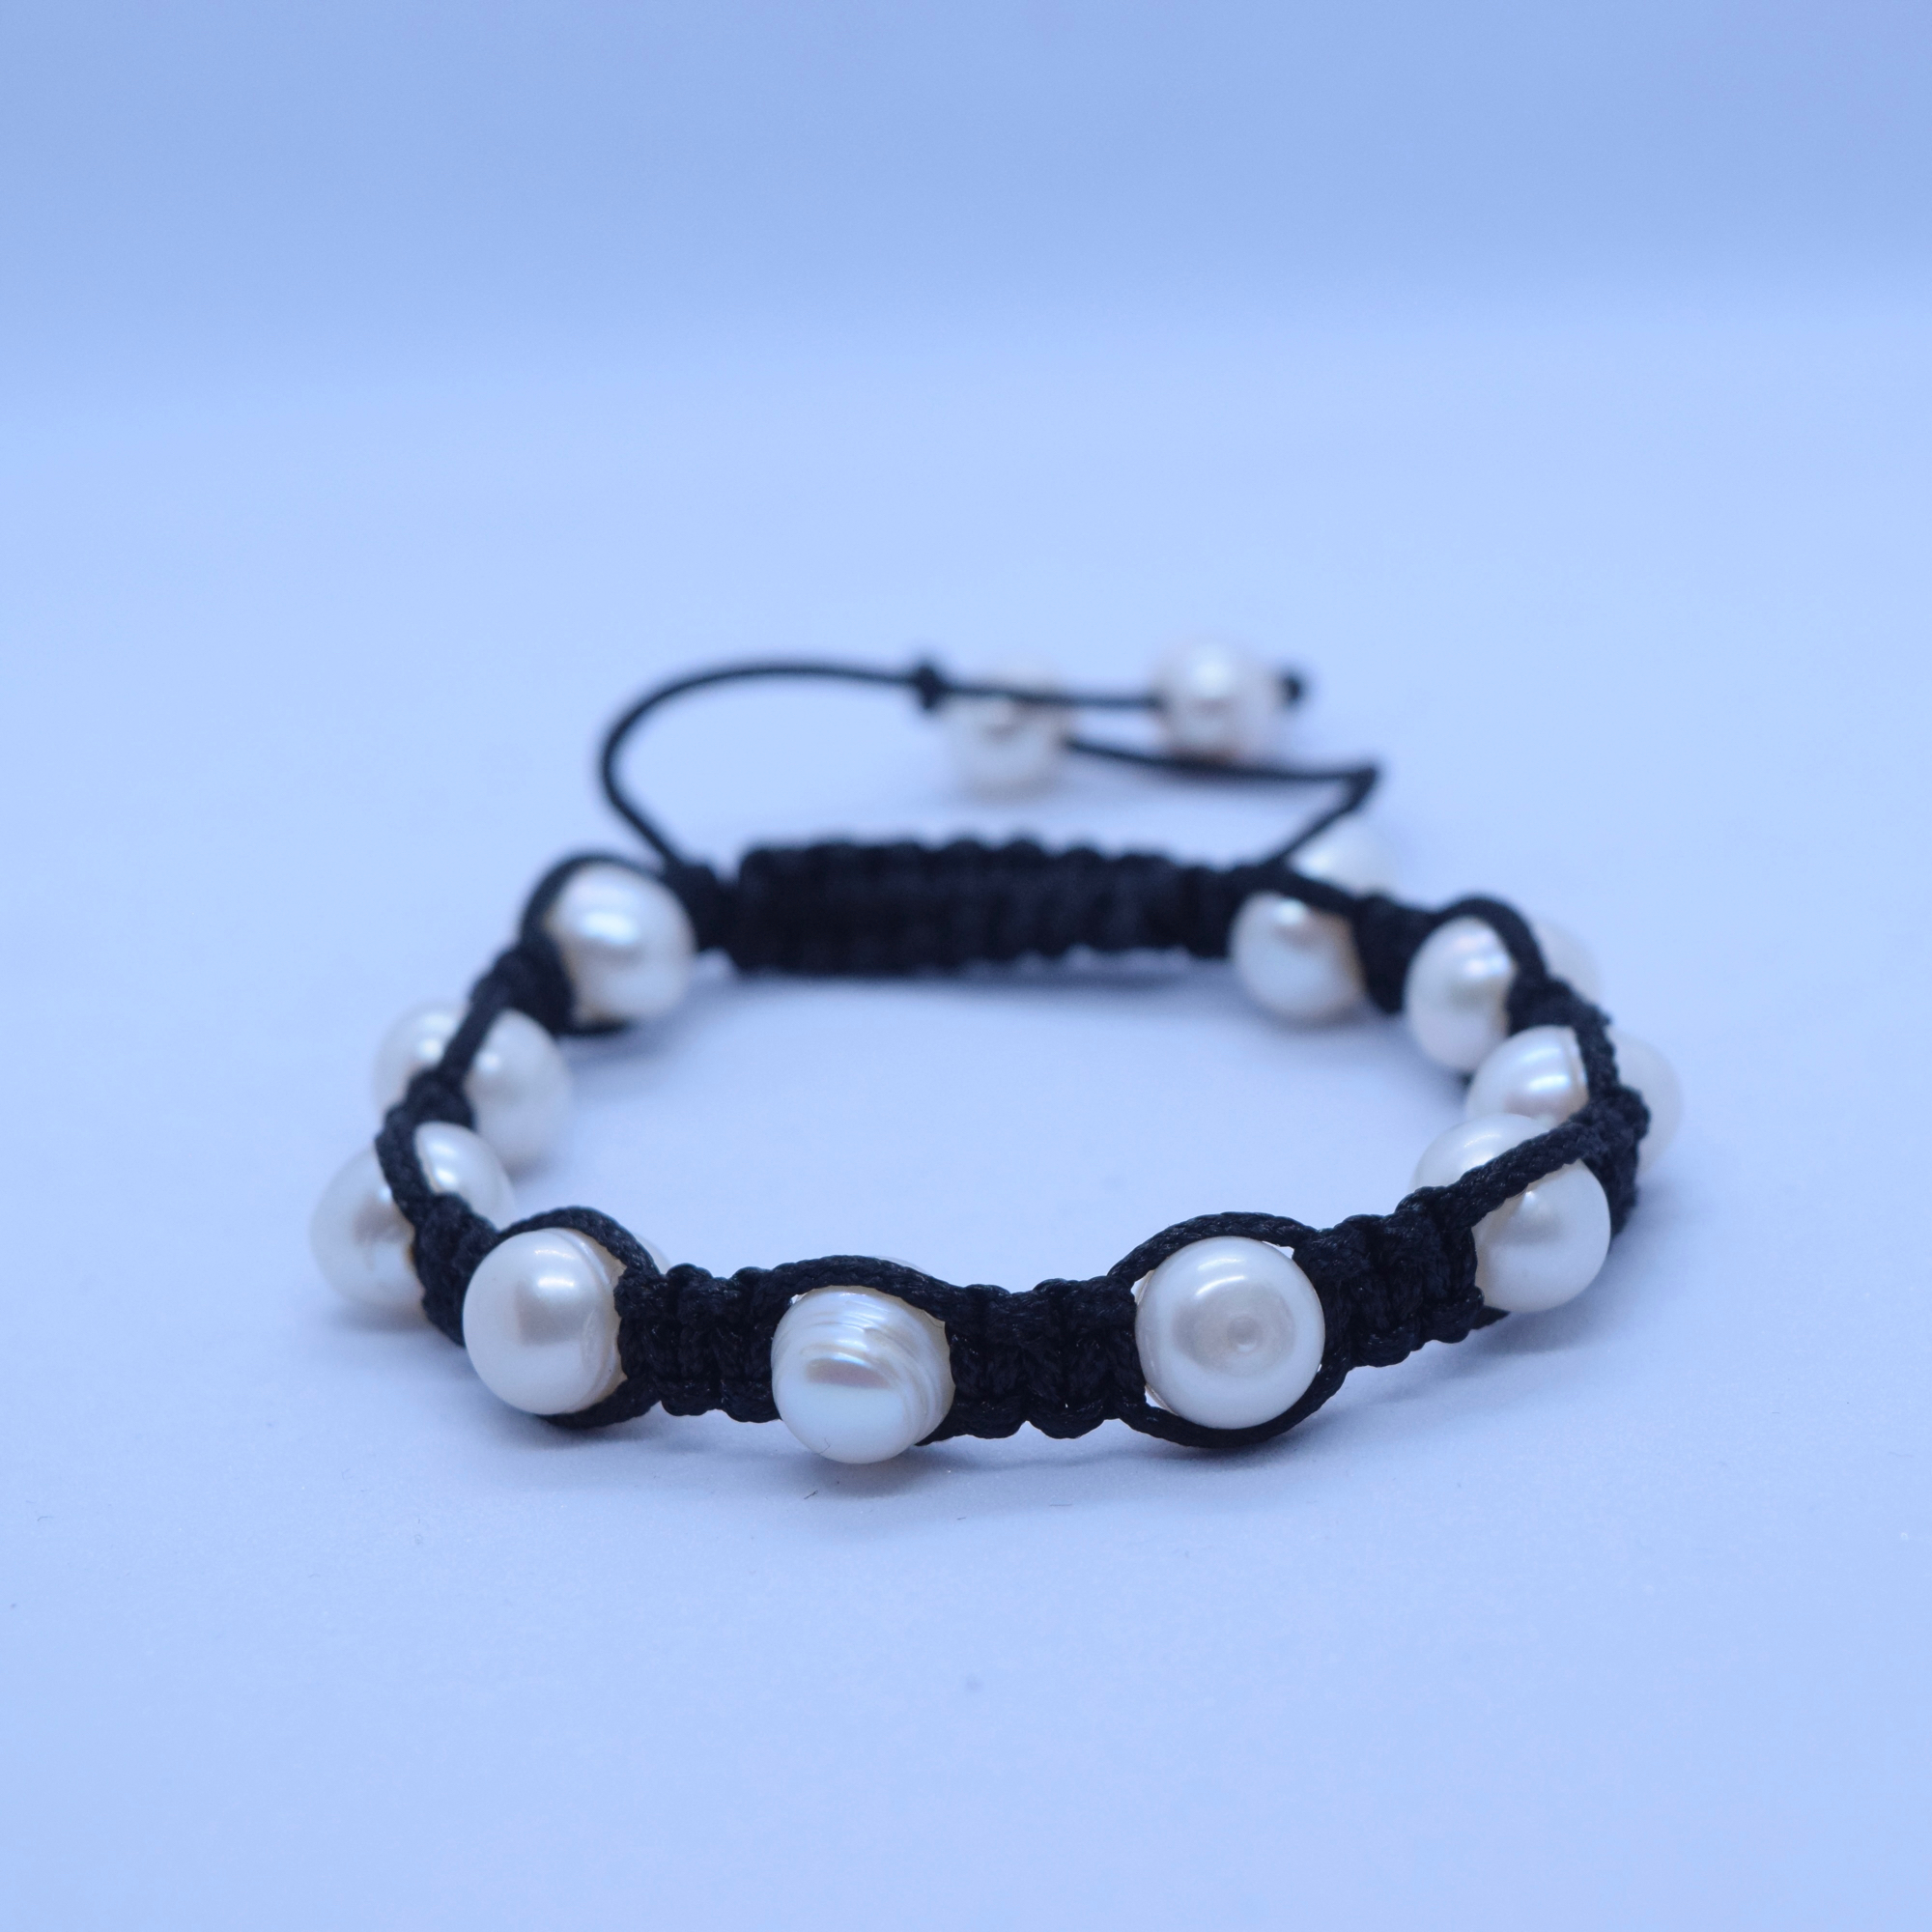 Mecrame Pearl Bracelet for Men from Pure Pearls on Sale